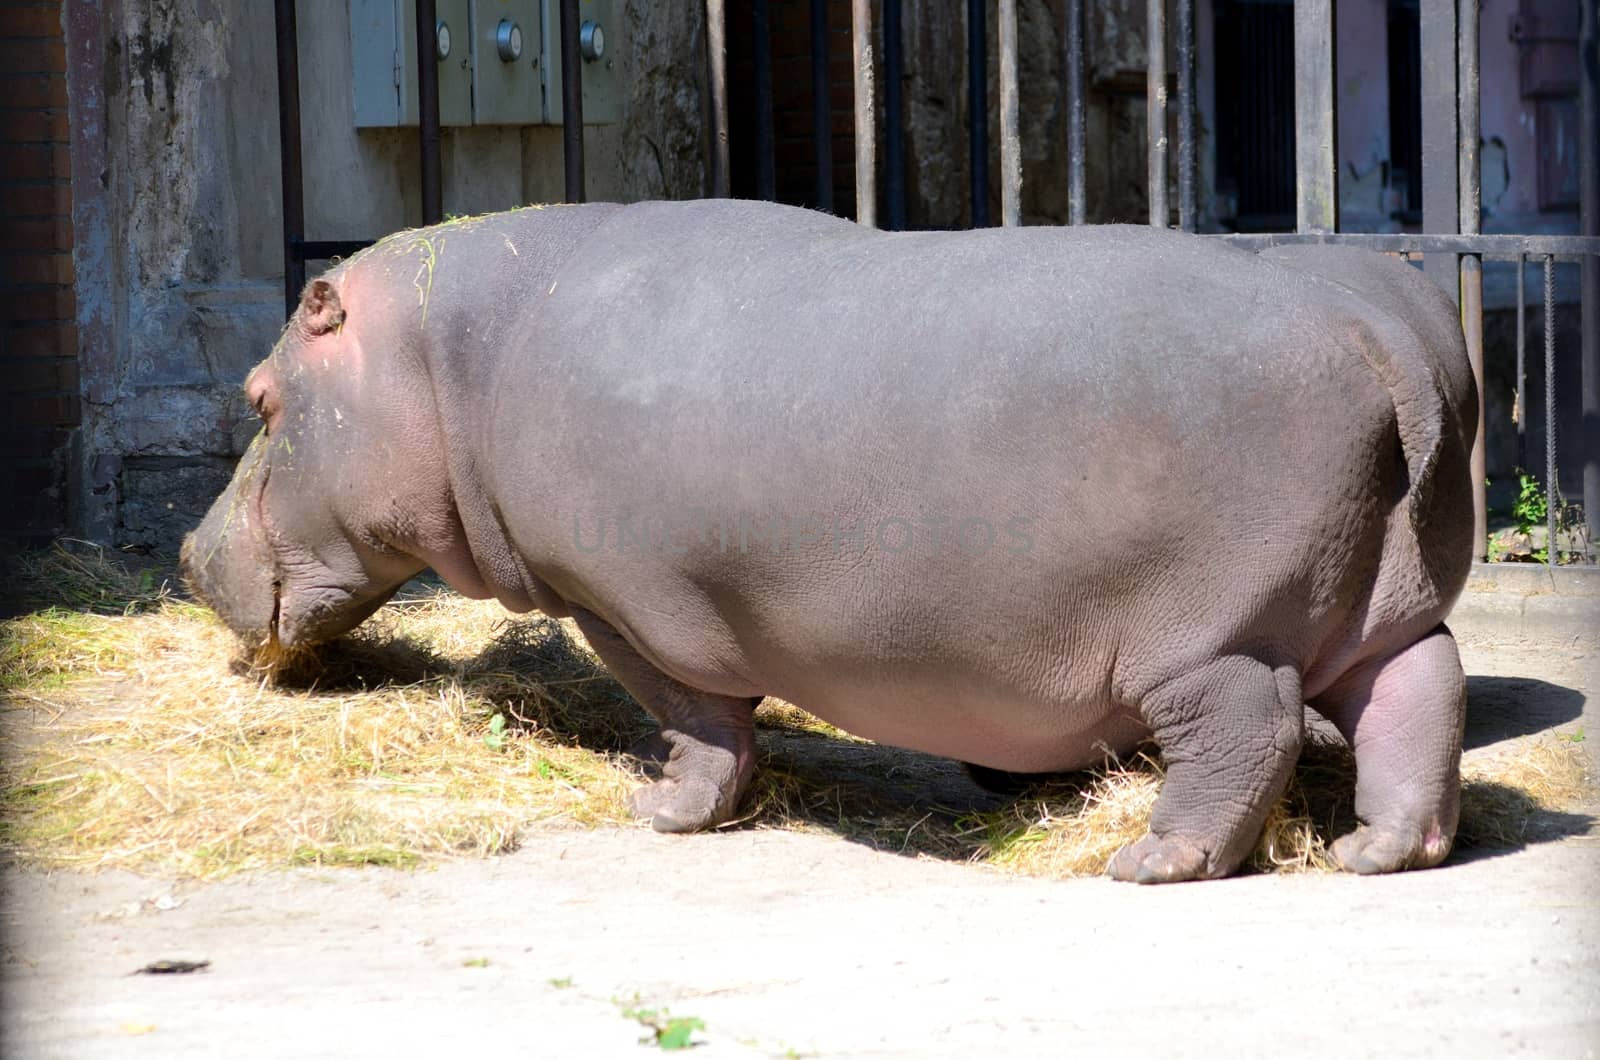 Lonely hippo in Wroclaw's ZOO, Poland. Heavy animal does not feel to move much in hot afternoon.